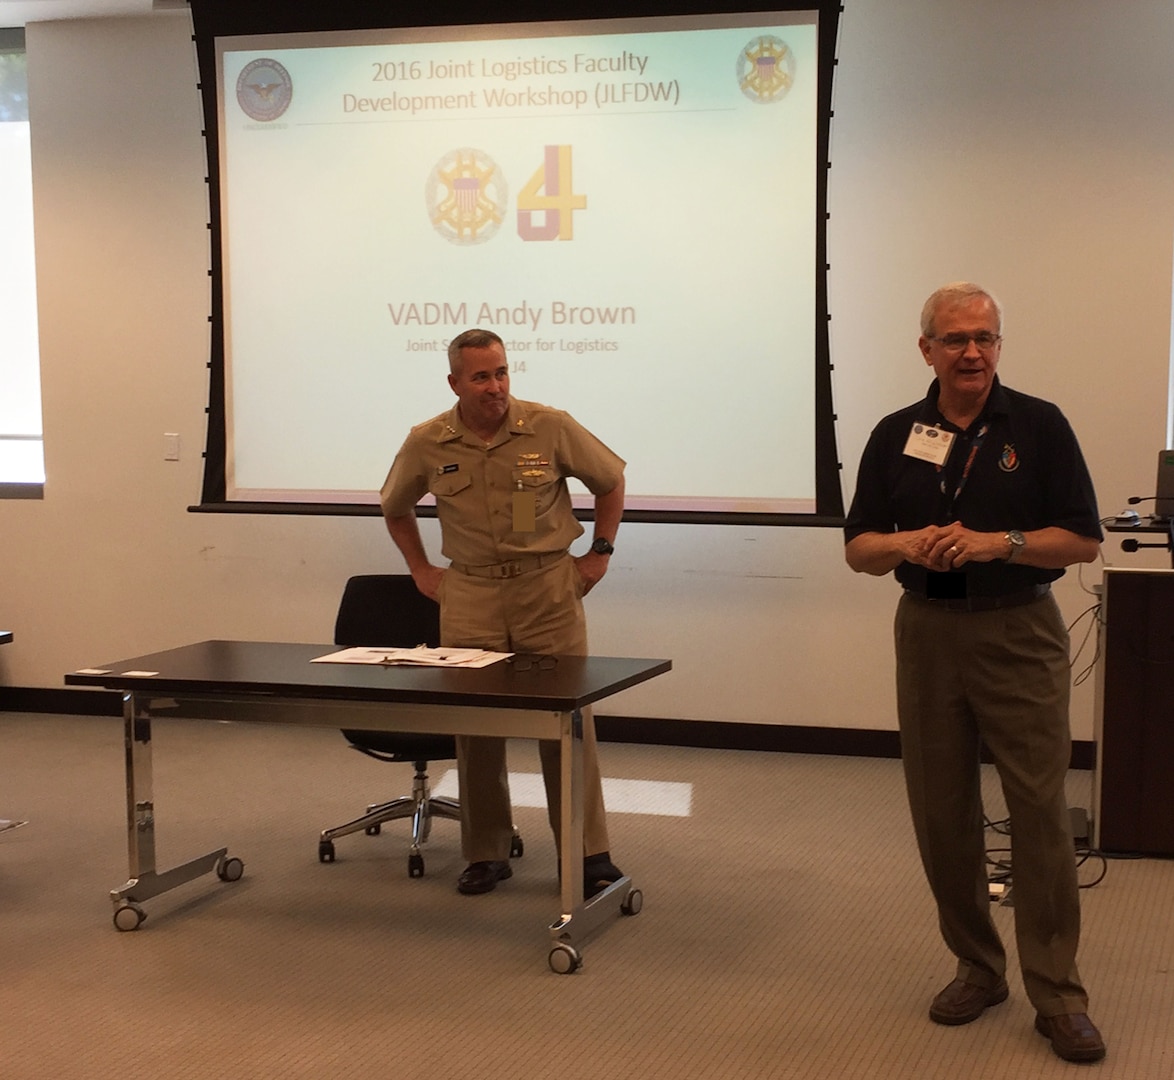 Navy Vice Admiral Andy Brown, Joint Staff Director for Logistics (left), is introduced by Lt Gen (Ret) Chris Kelly, Director of the Center for Joint & Strategic Logistics, prior to offering his insights and guidance to over 30 faculty and logistics staff members in attendance for the 2016 Joint Logistics Faculty Development Workshop.